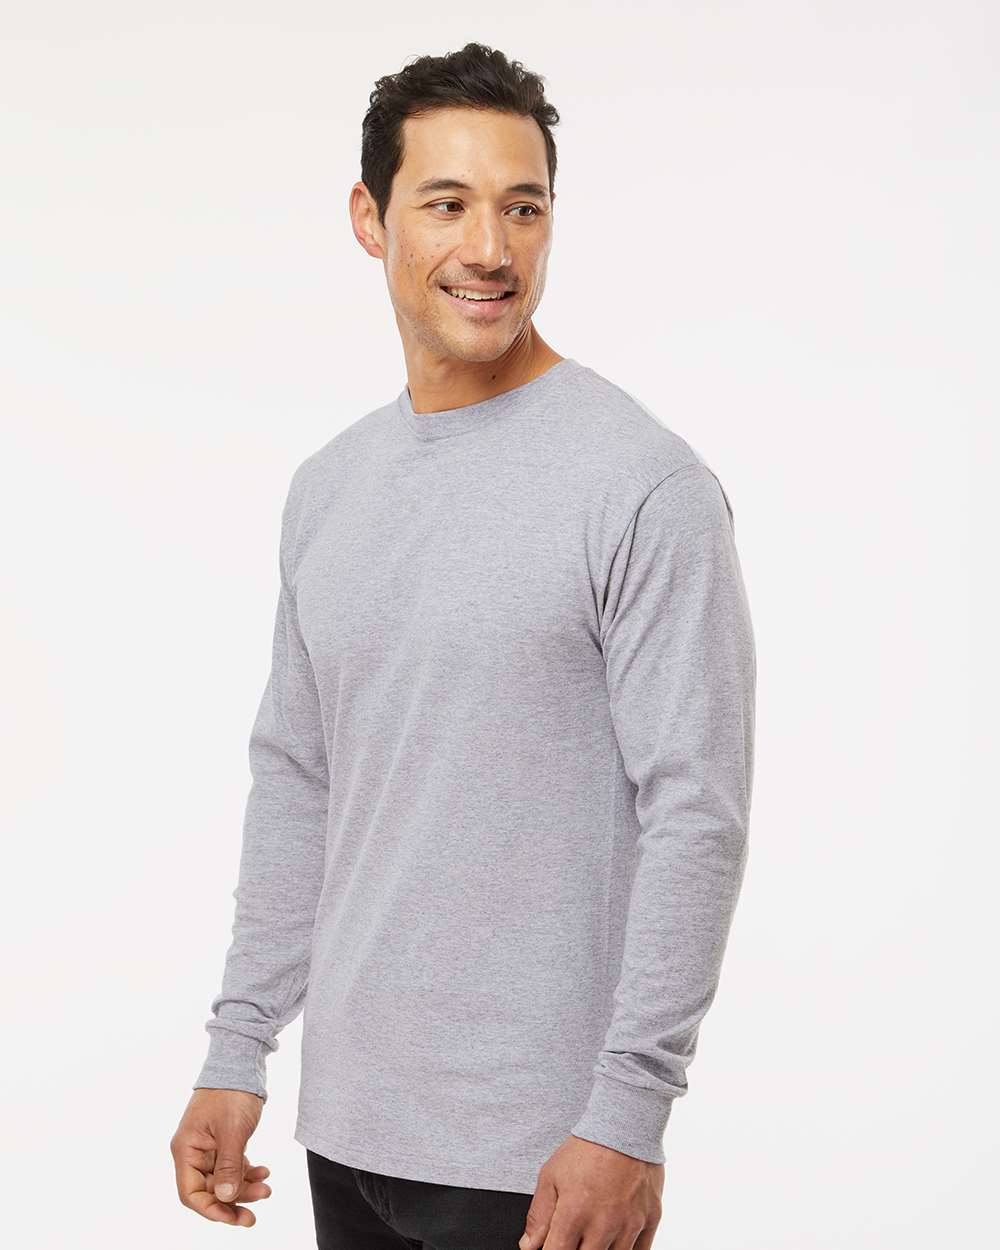 M&O Gold Soft Touch Long Sleeve T-Shirt 4820 #colormdl_Athletic Heather